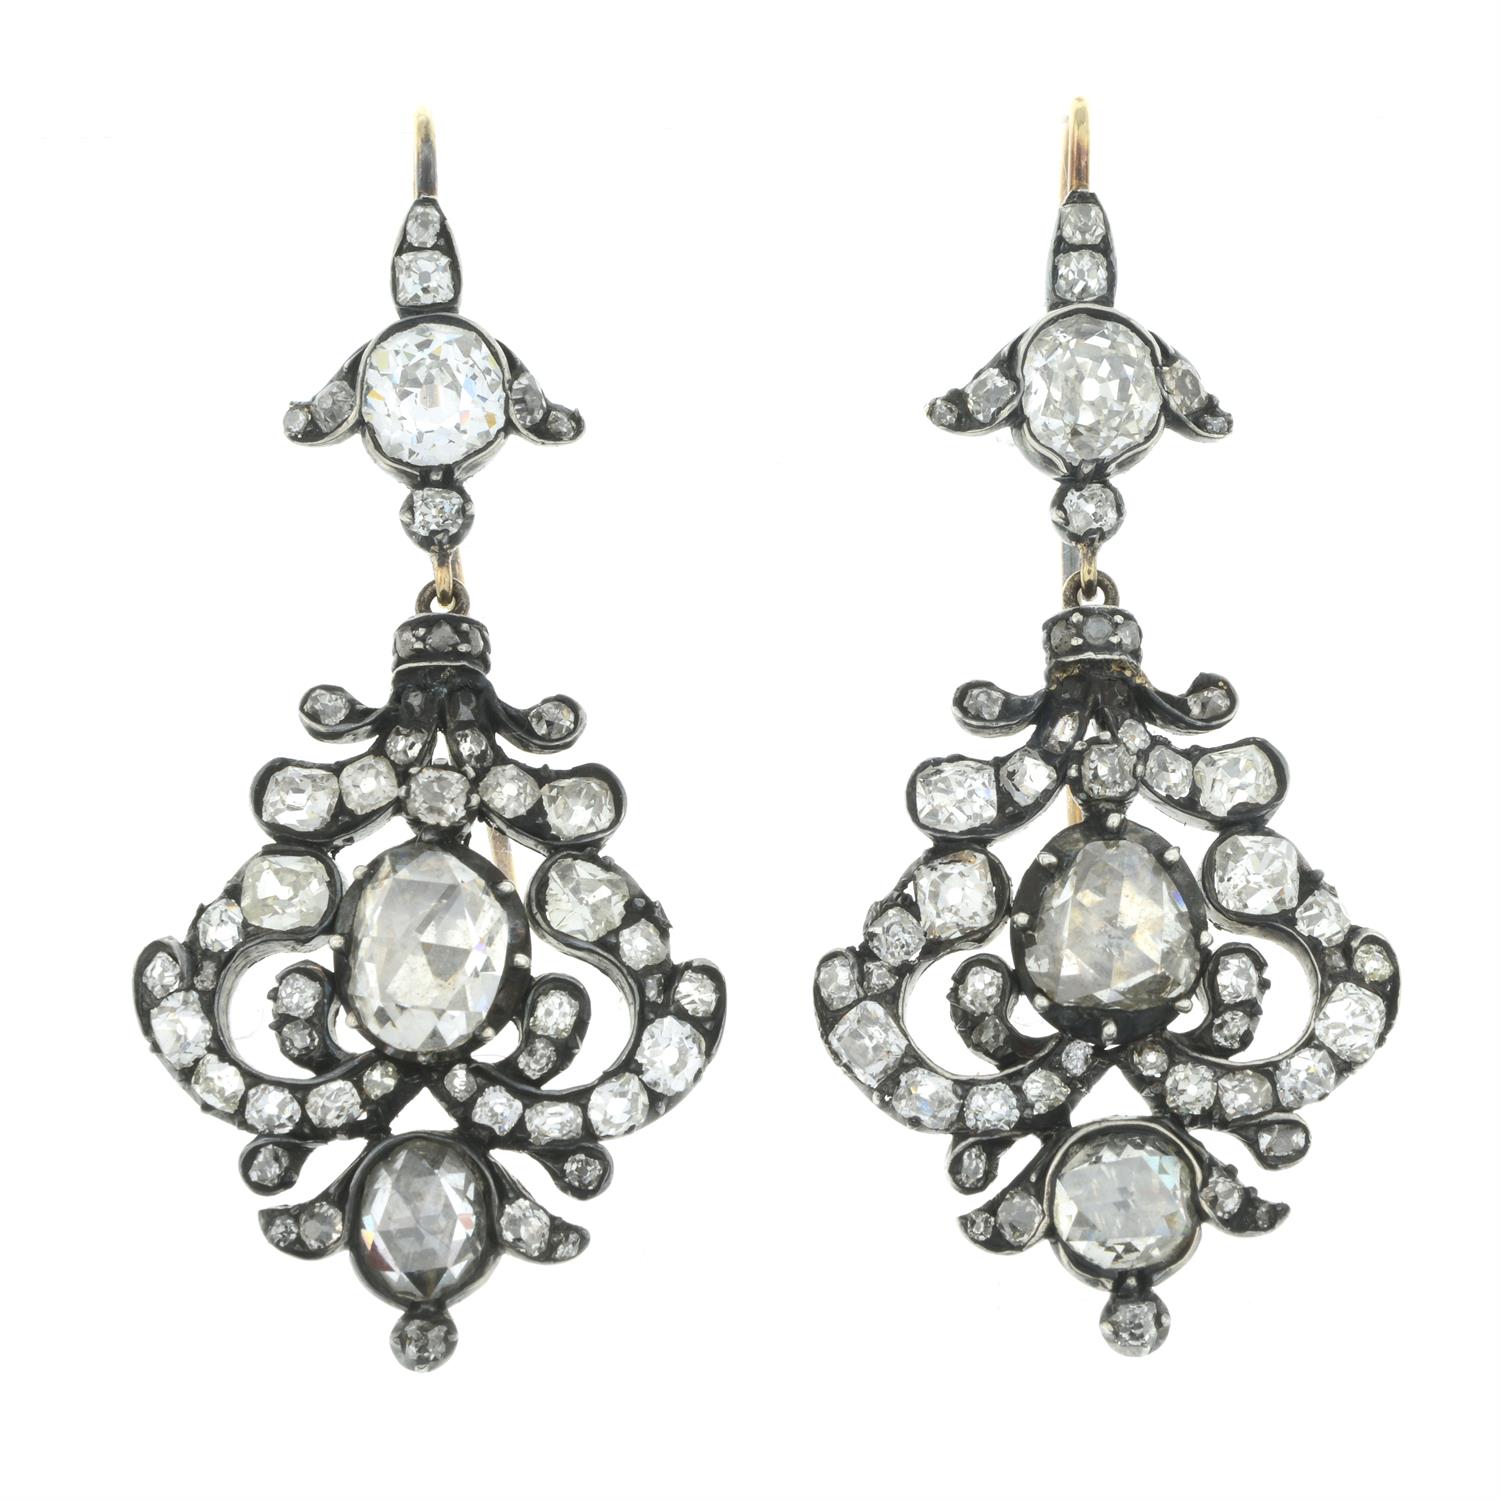 Old and rose-cut diamond earrings - Image 2 of 4